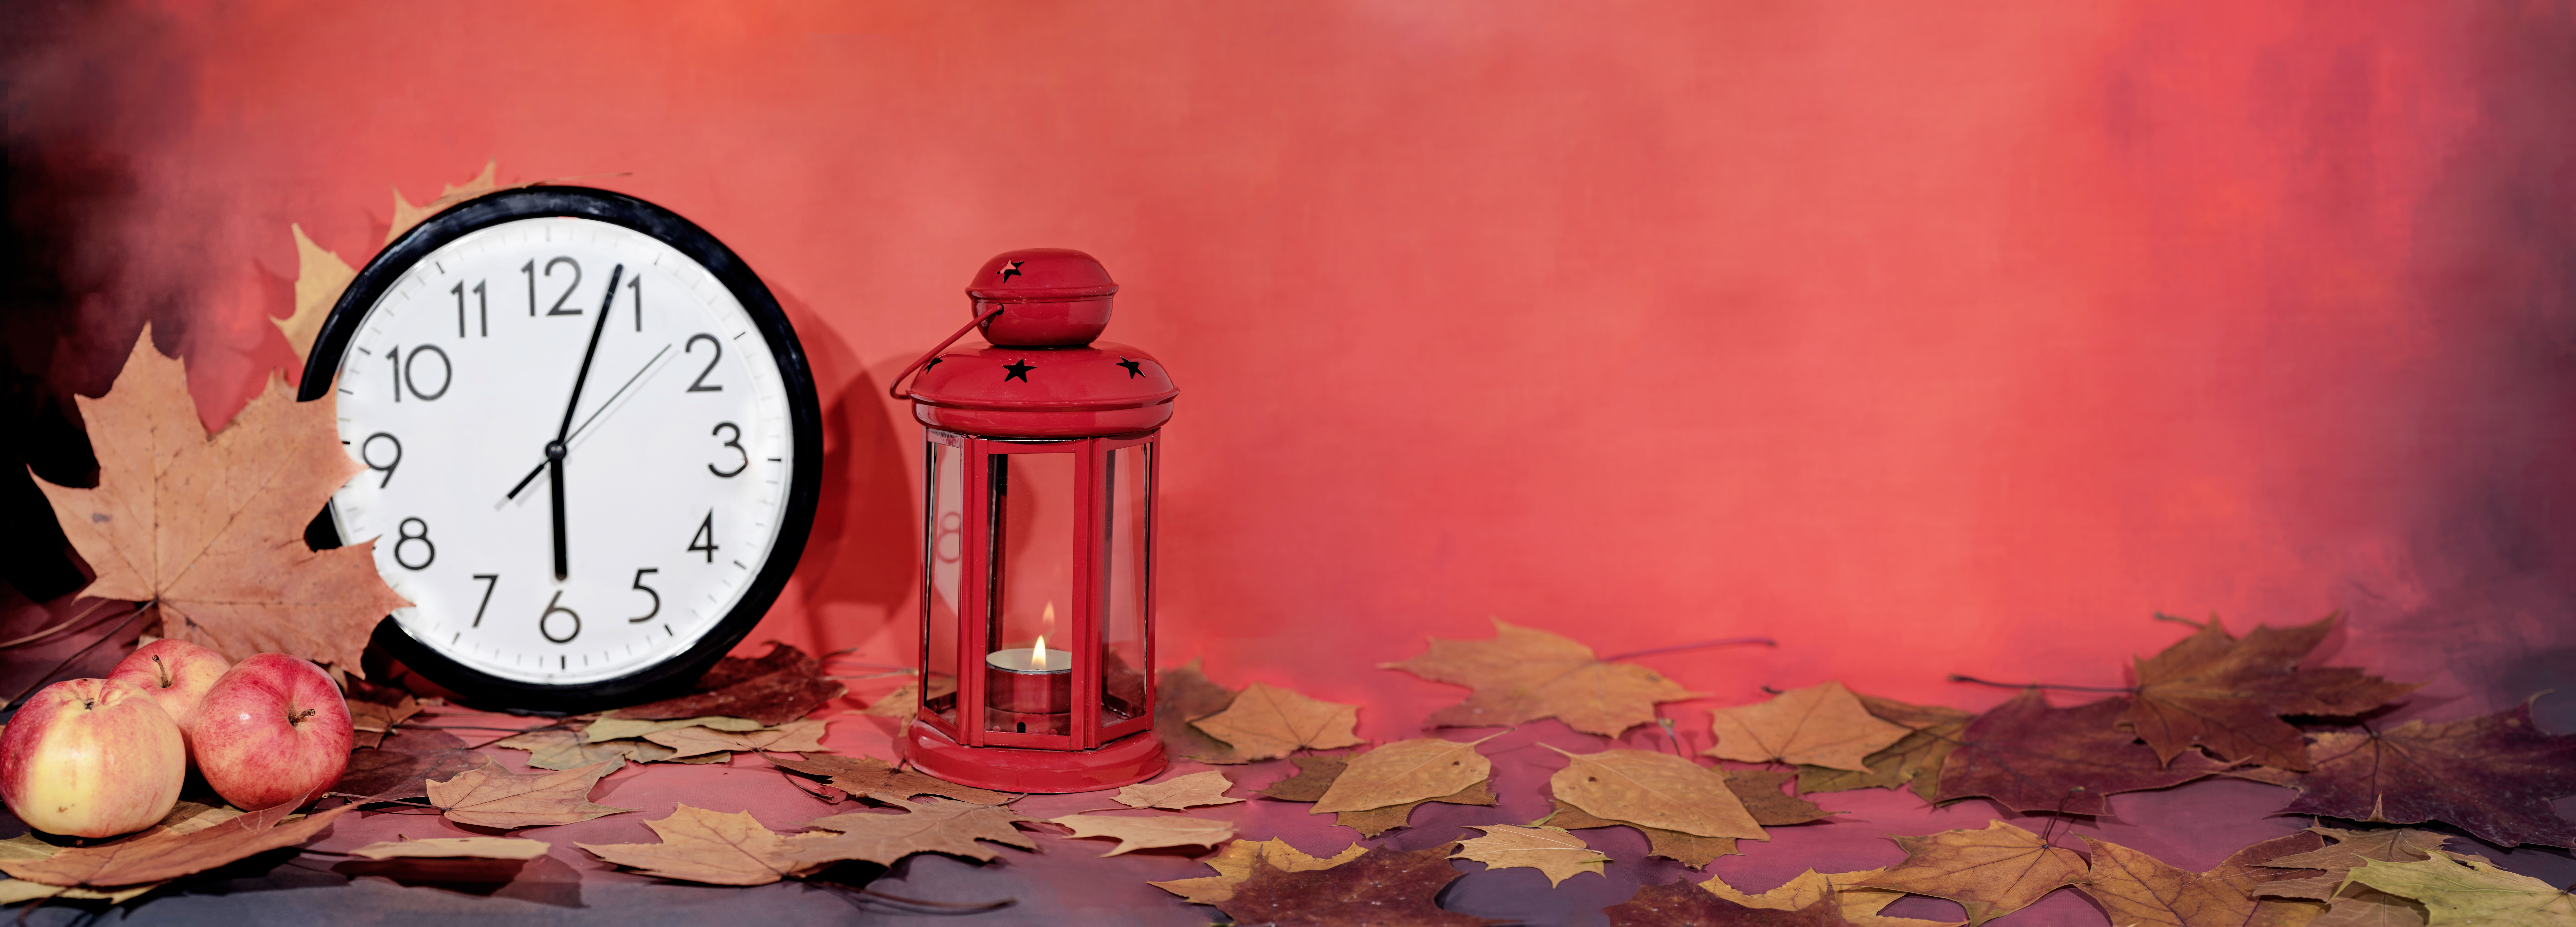 A clock surrounded by autumn leaves with a glass lantern positioned next to it. The time reads 6:03.